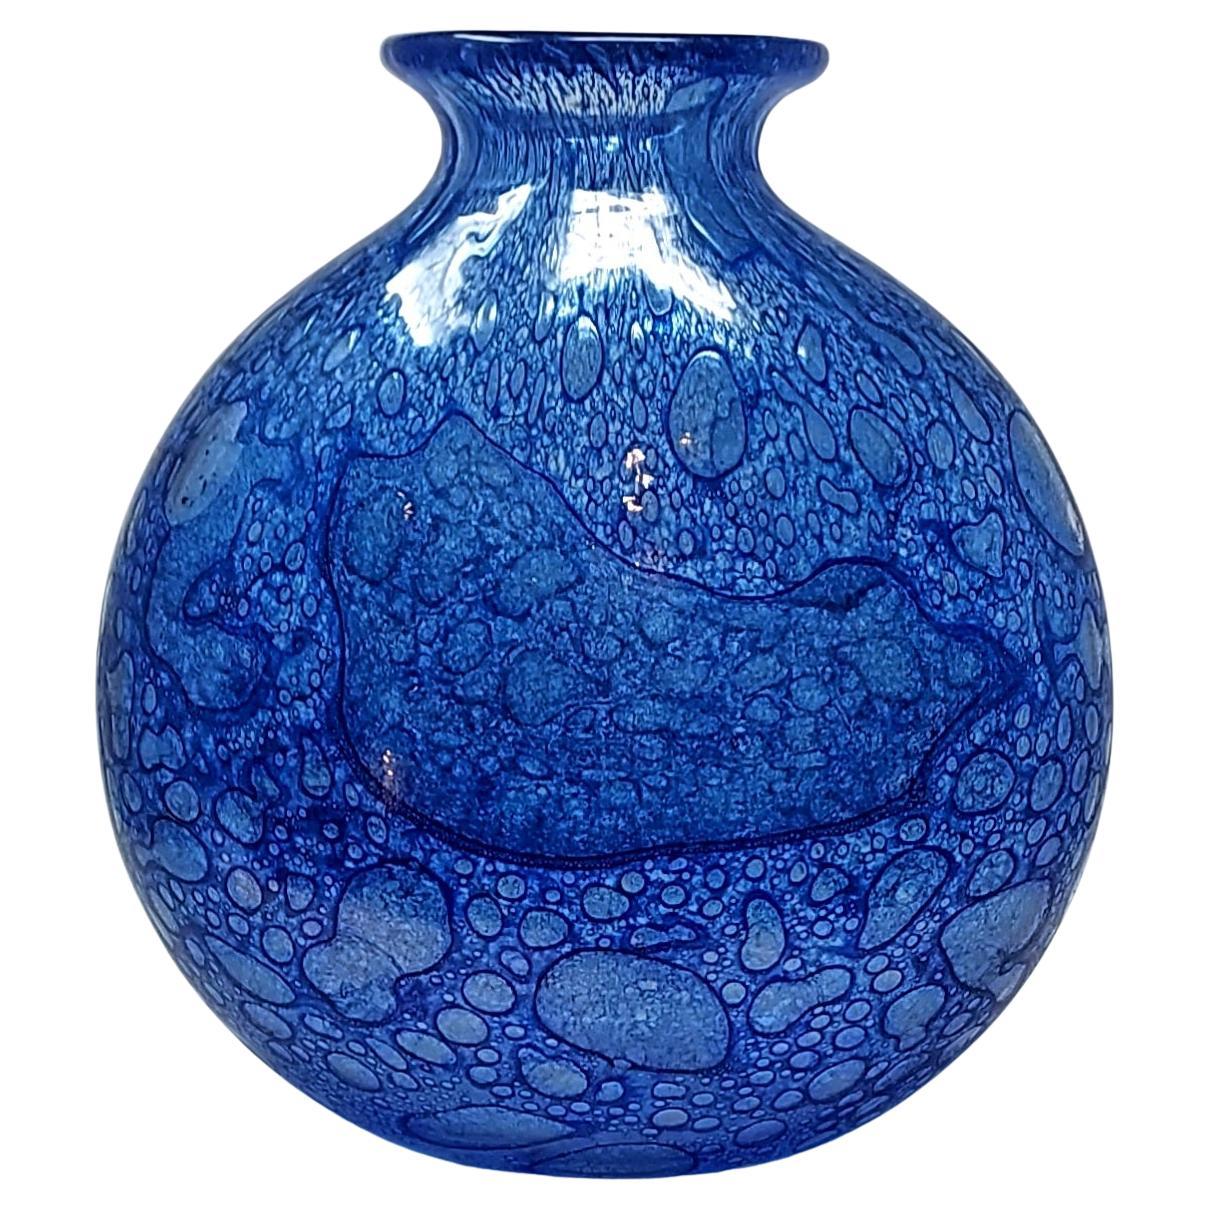 Ercole Barovier's "Efeso" Vase by Barovier & Toso For Sale